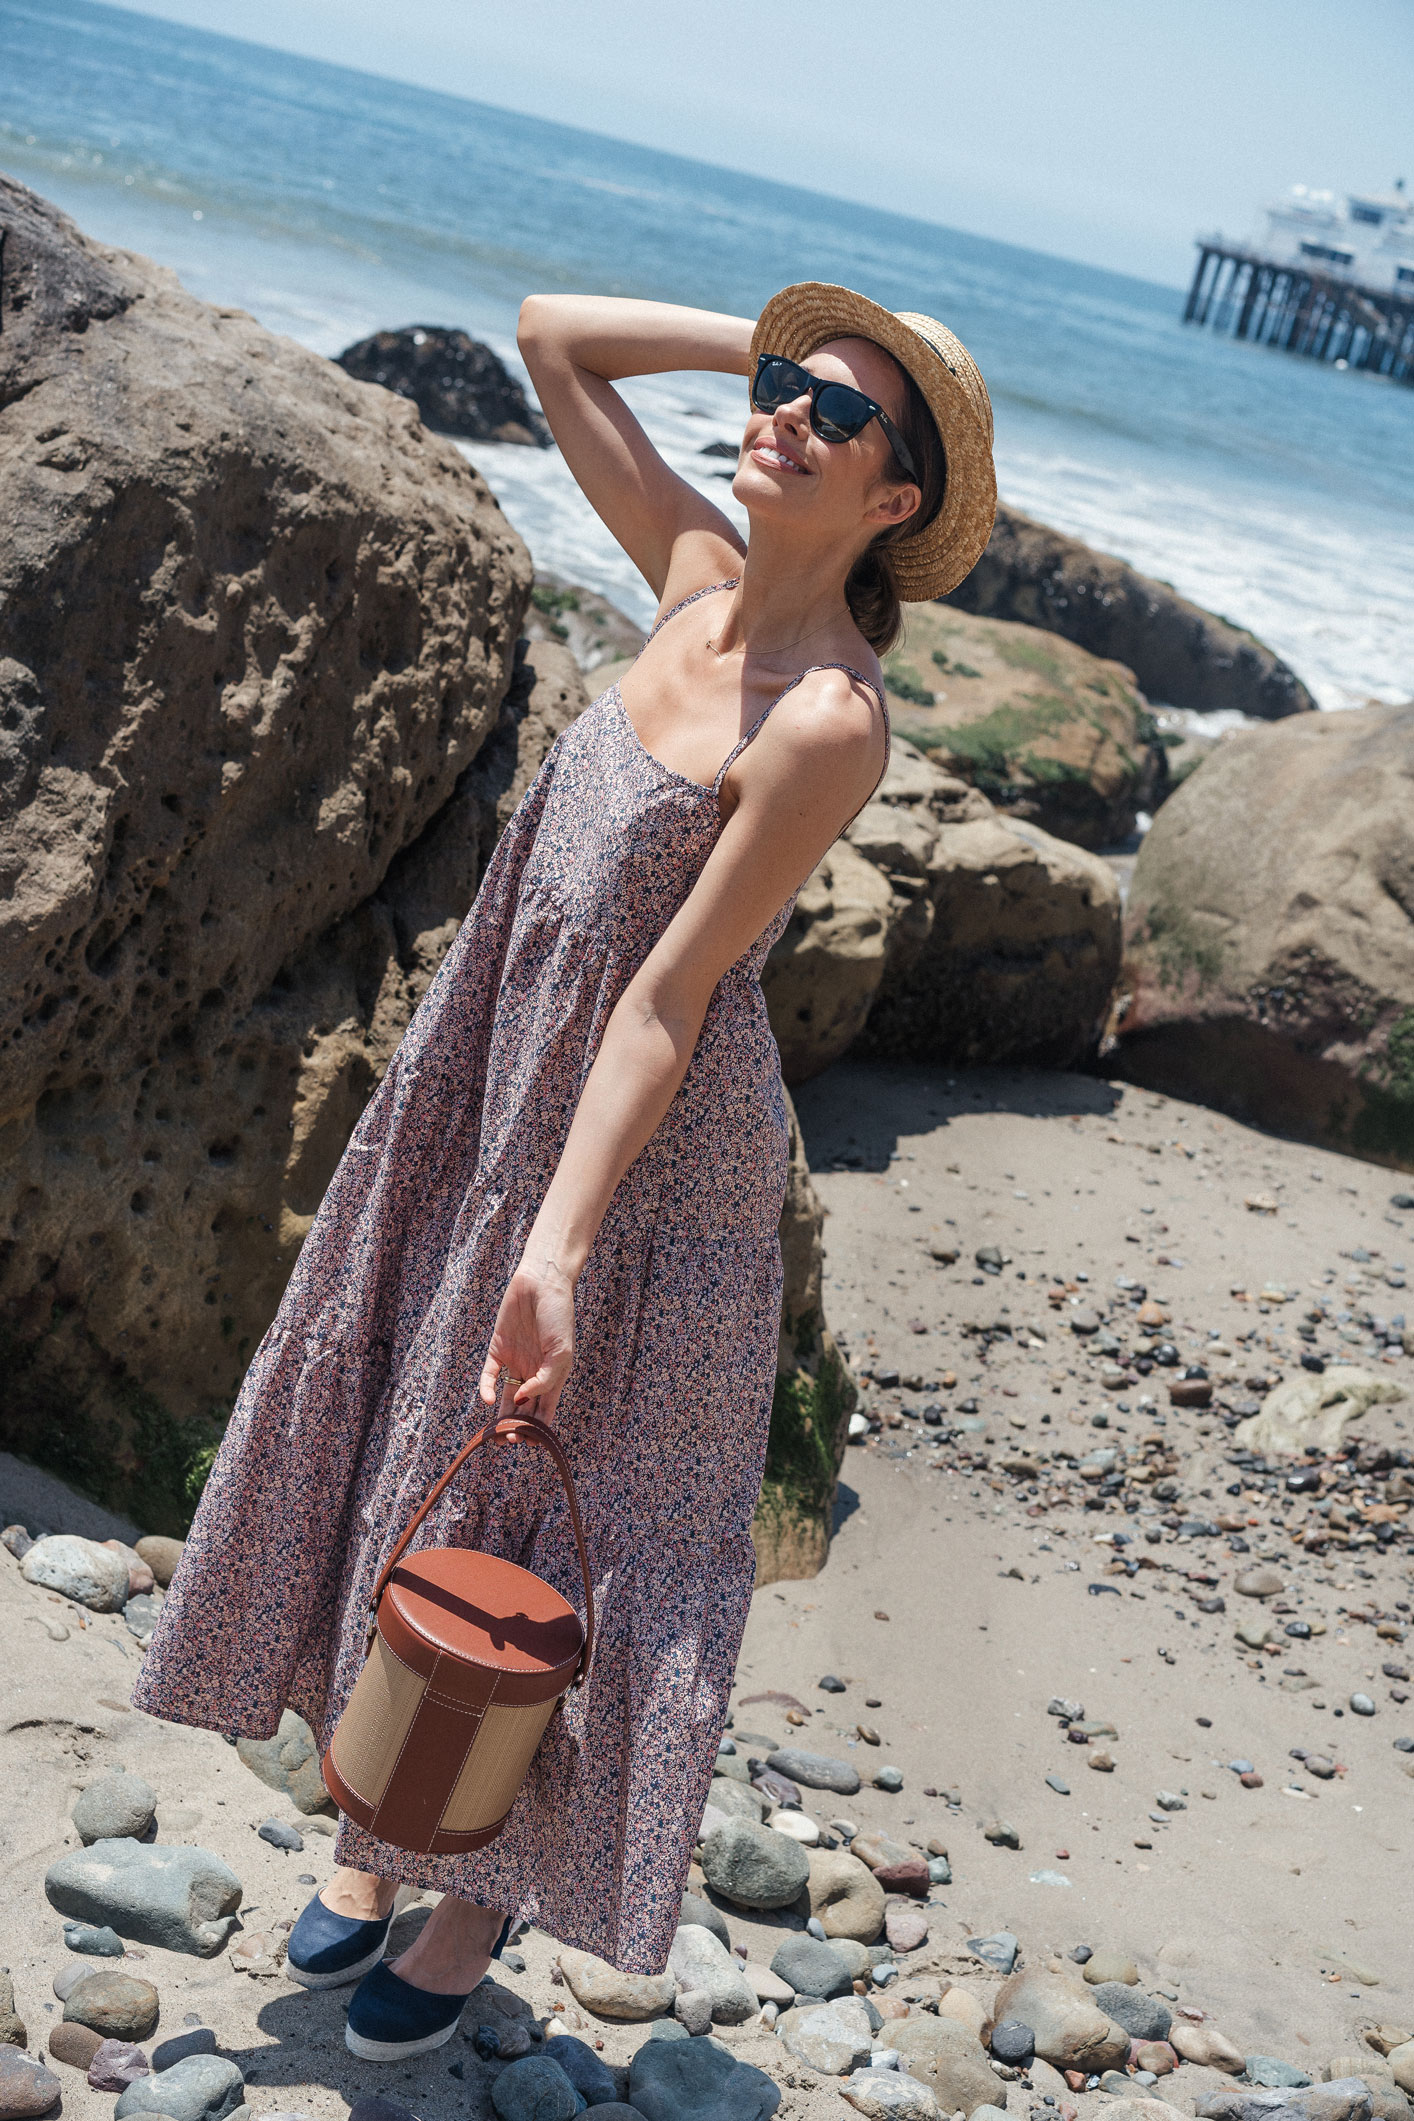 Louise Roe of Front shows what her top 5 beach chic essentials are